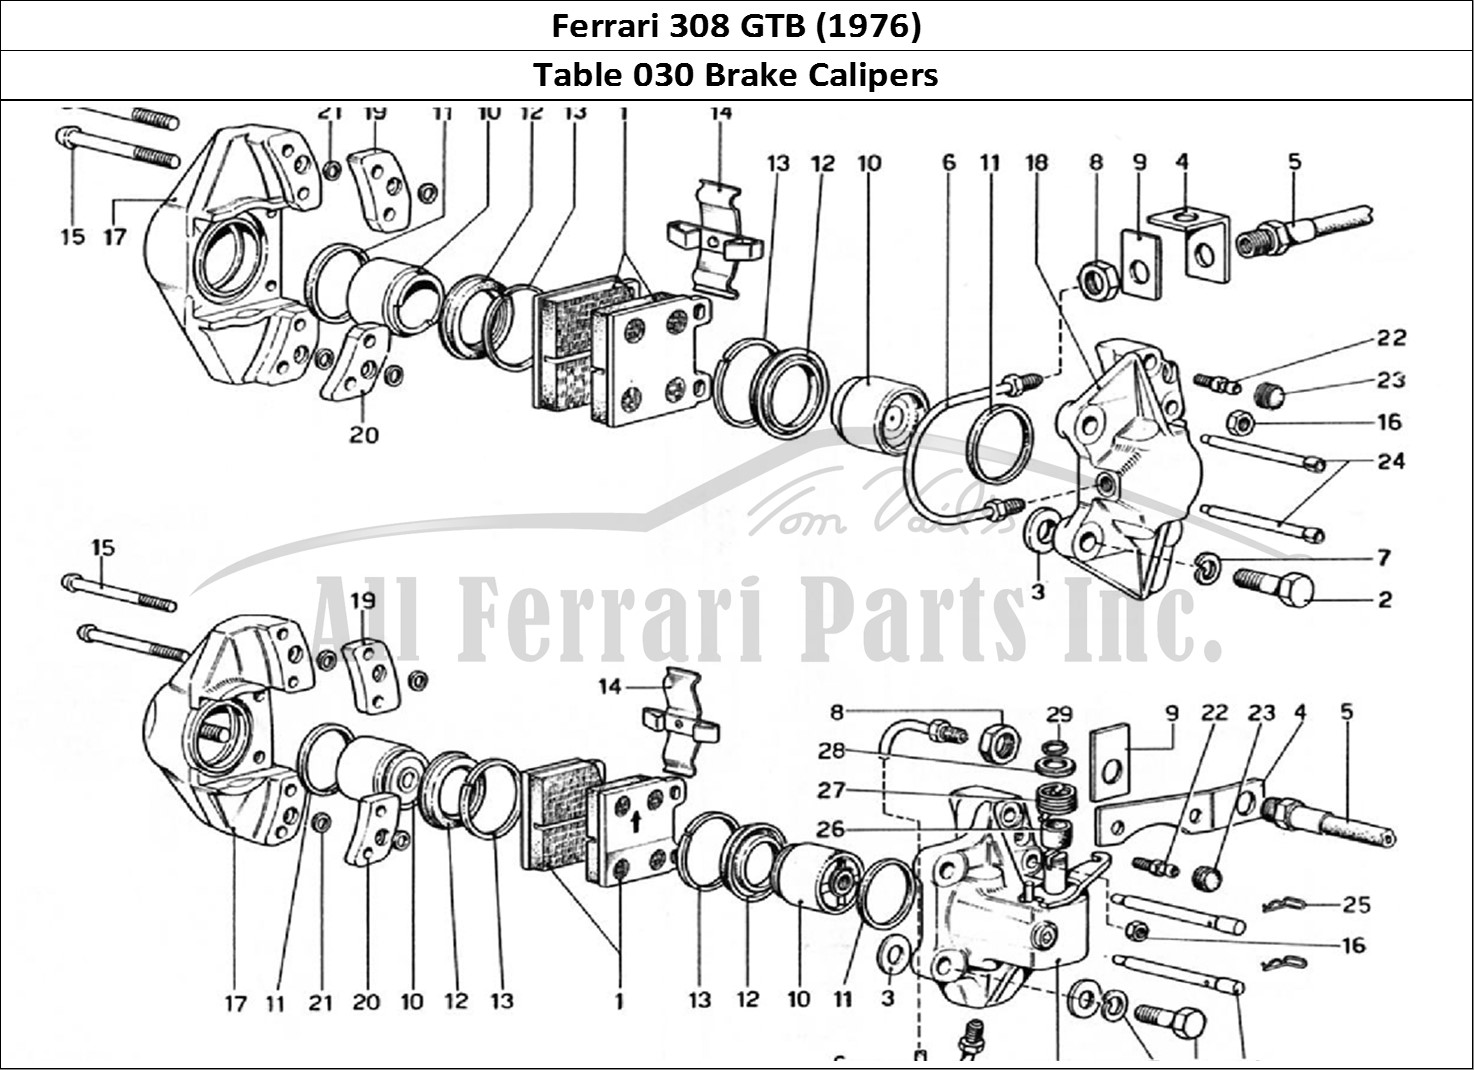 Ferrari Parts Ferrari 308 GTB (1976) Page 030 Calipers for Front and Re